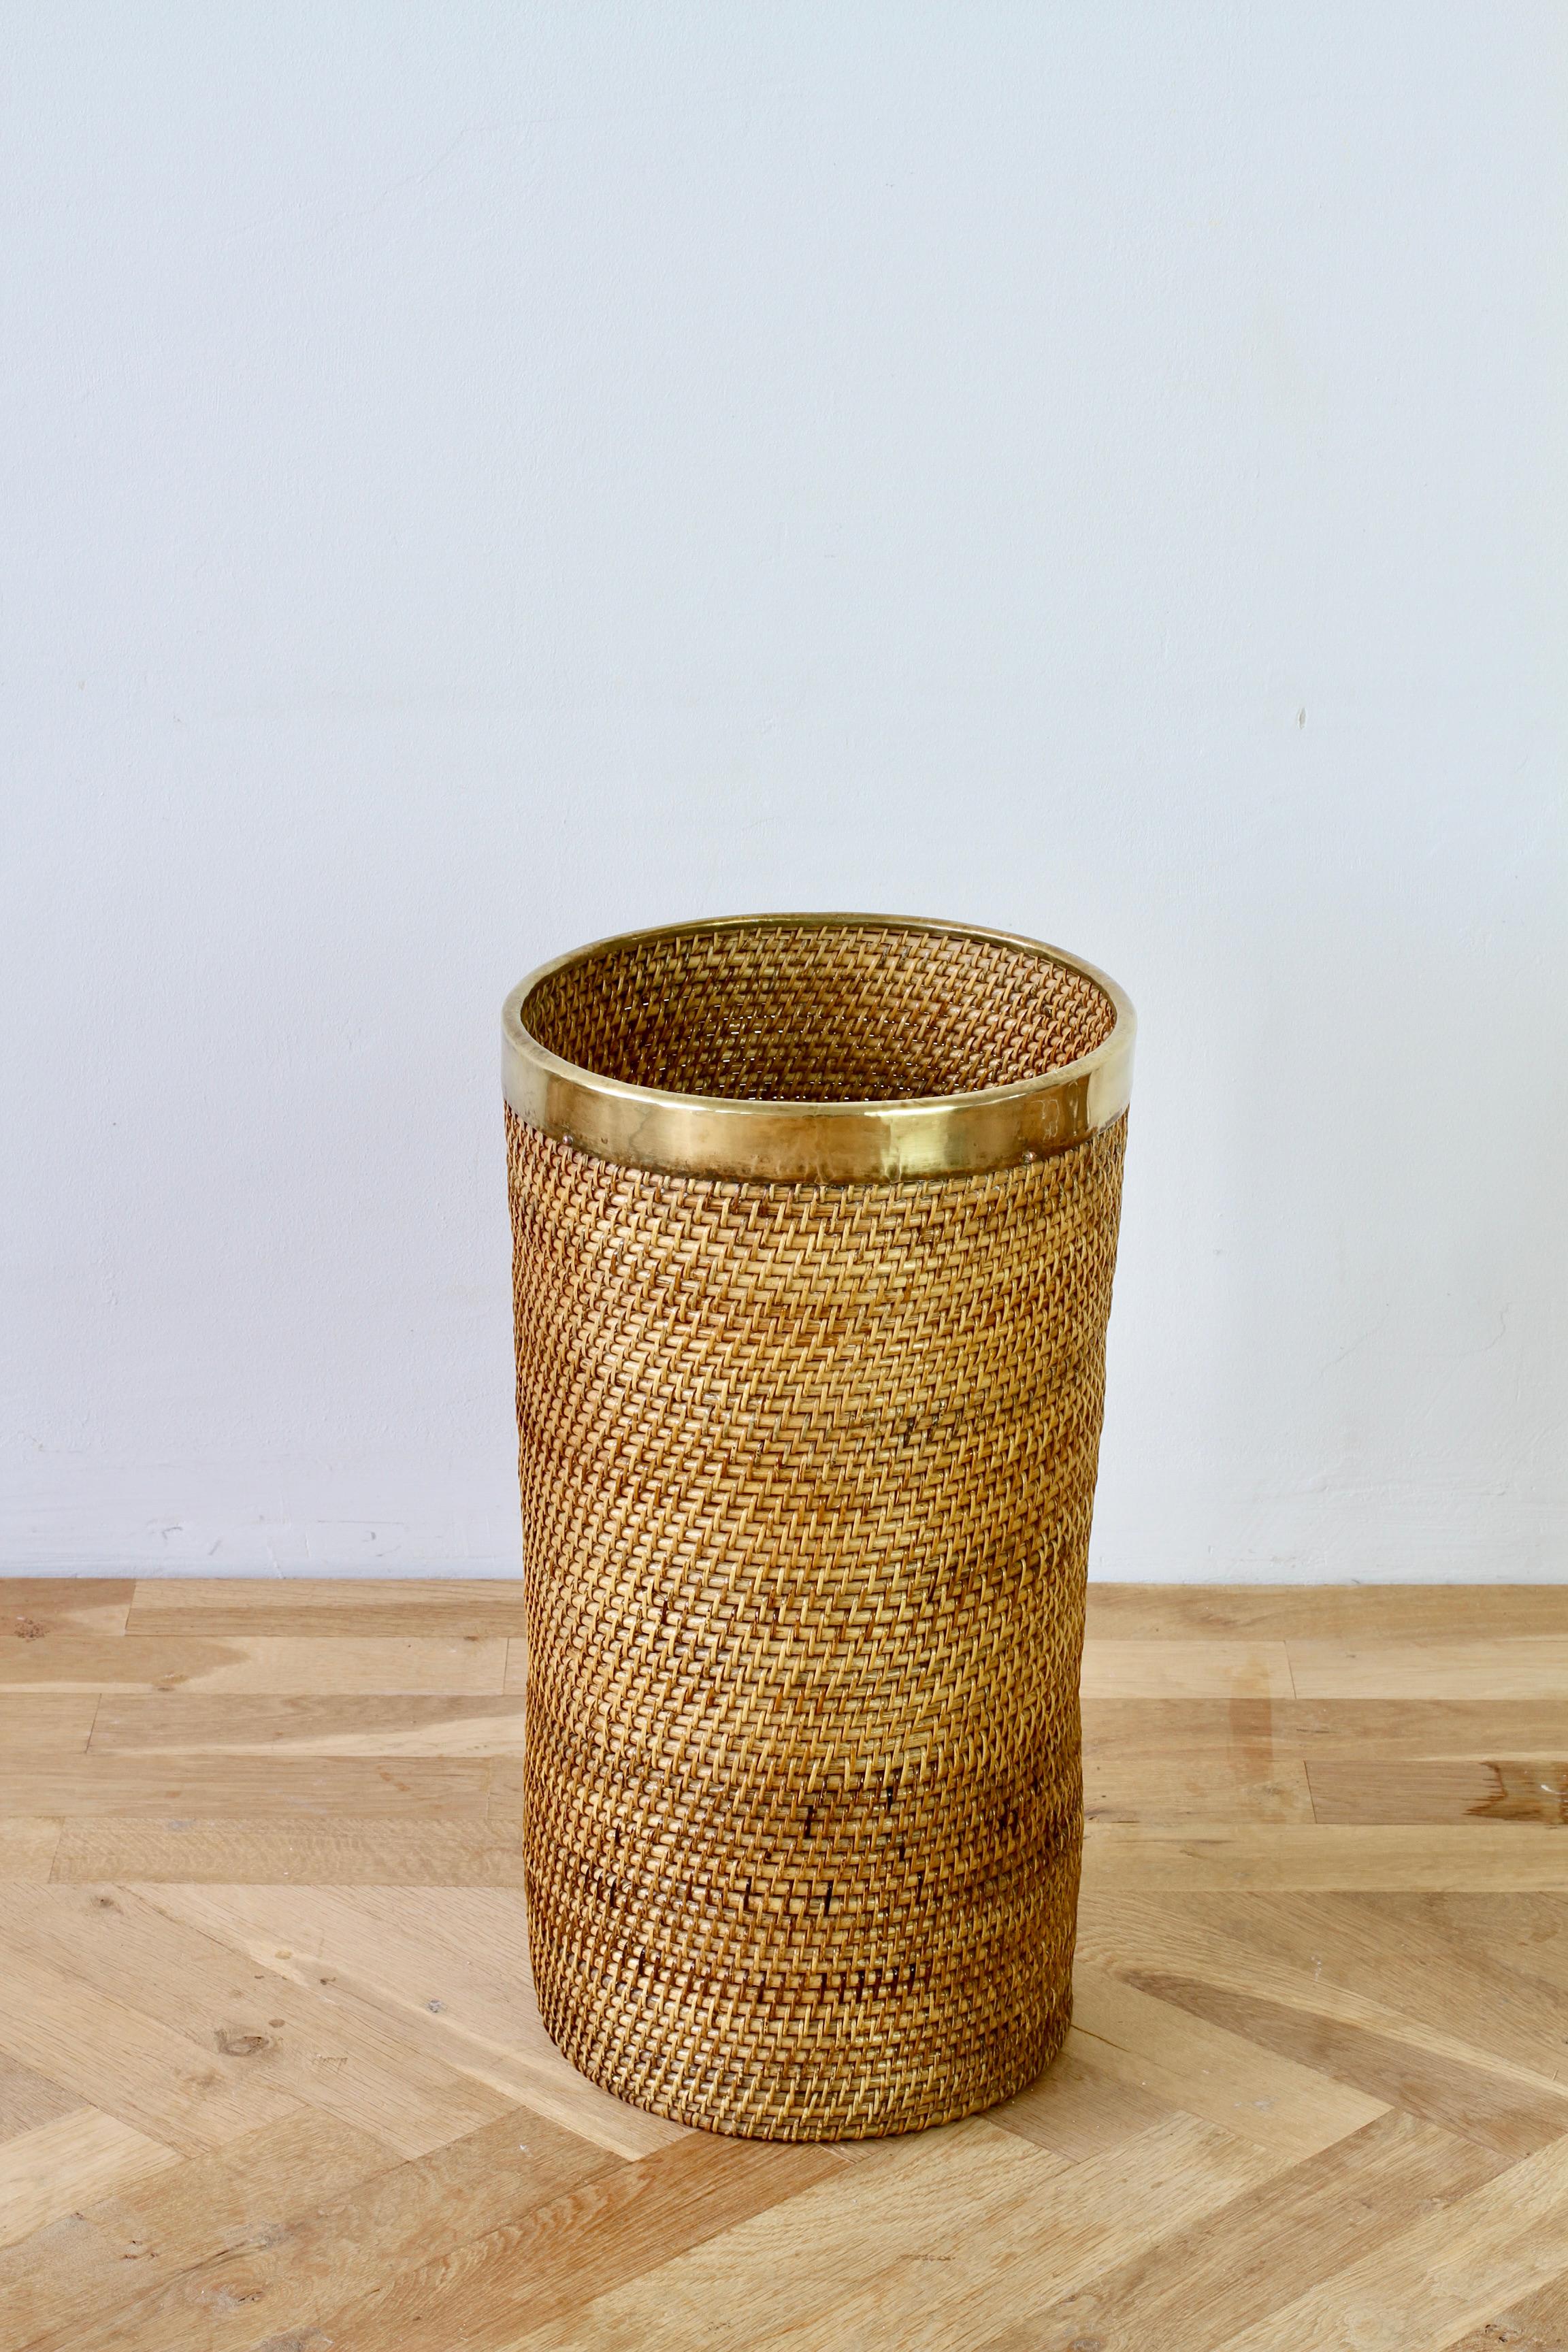 Tall and large mid-century Hollywood Regency umbrella stand / holder made in Italy, circa 1970s. Made of bamboo and rattan with a patinated brass metal rim, which finishes the piece perfectly. A must have for any Hollywood Regency enthusiast and